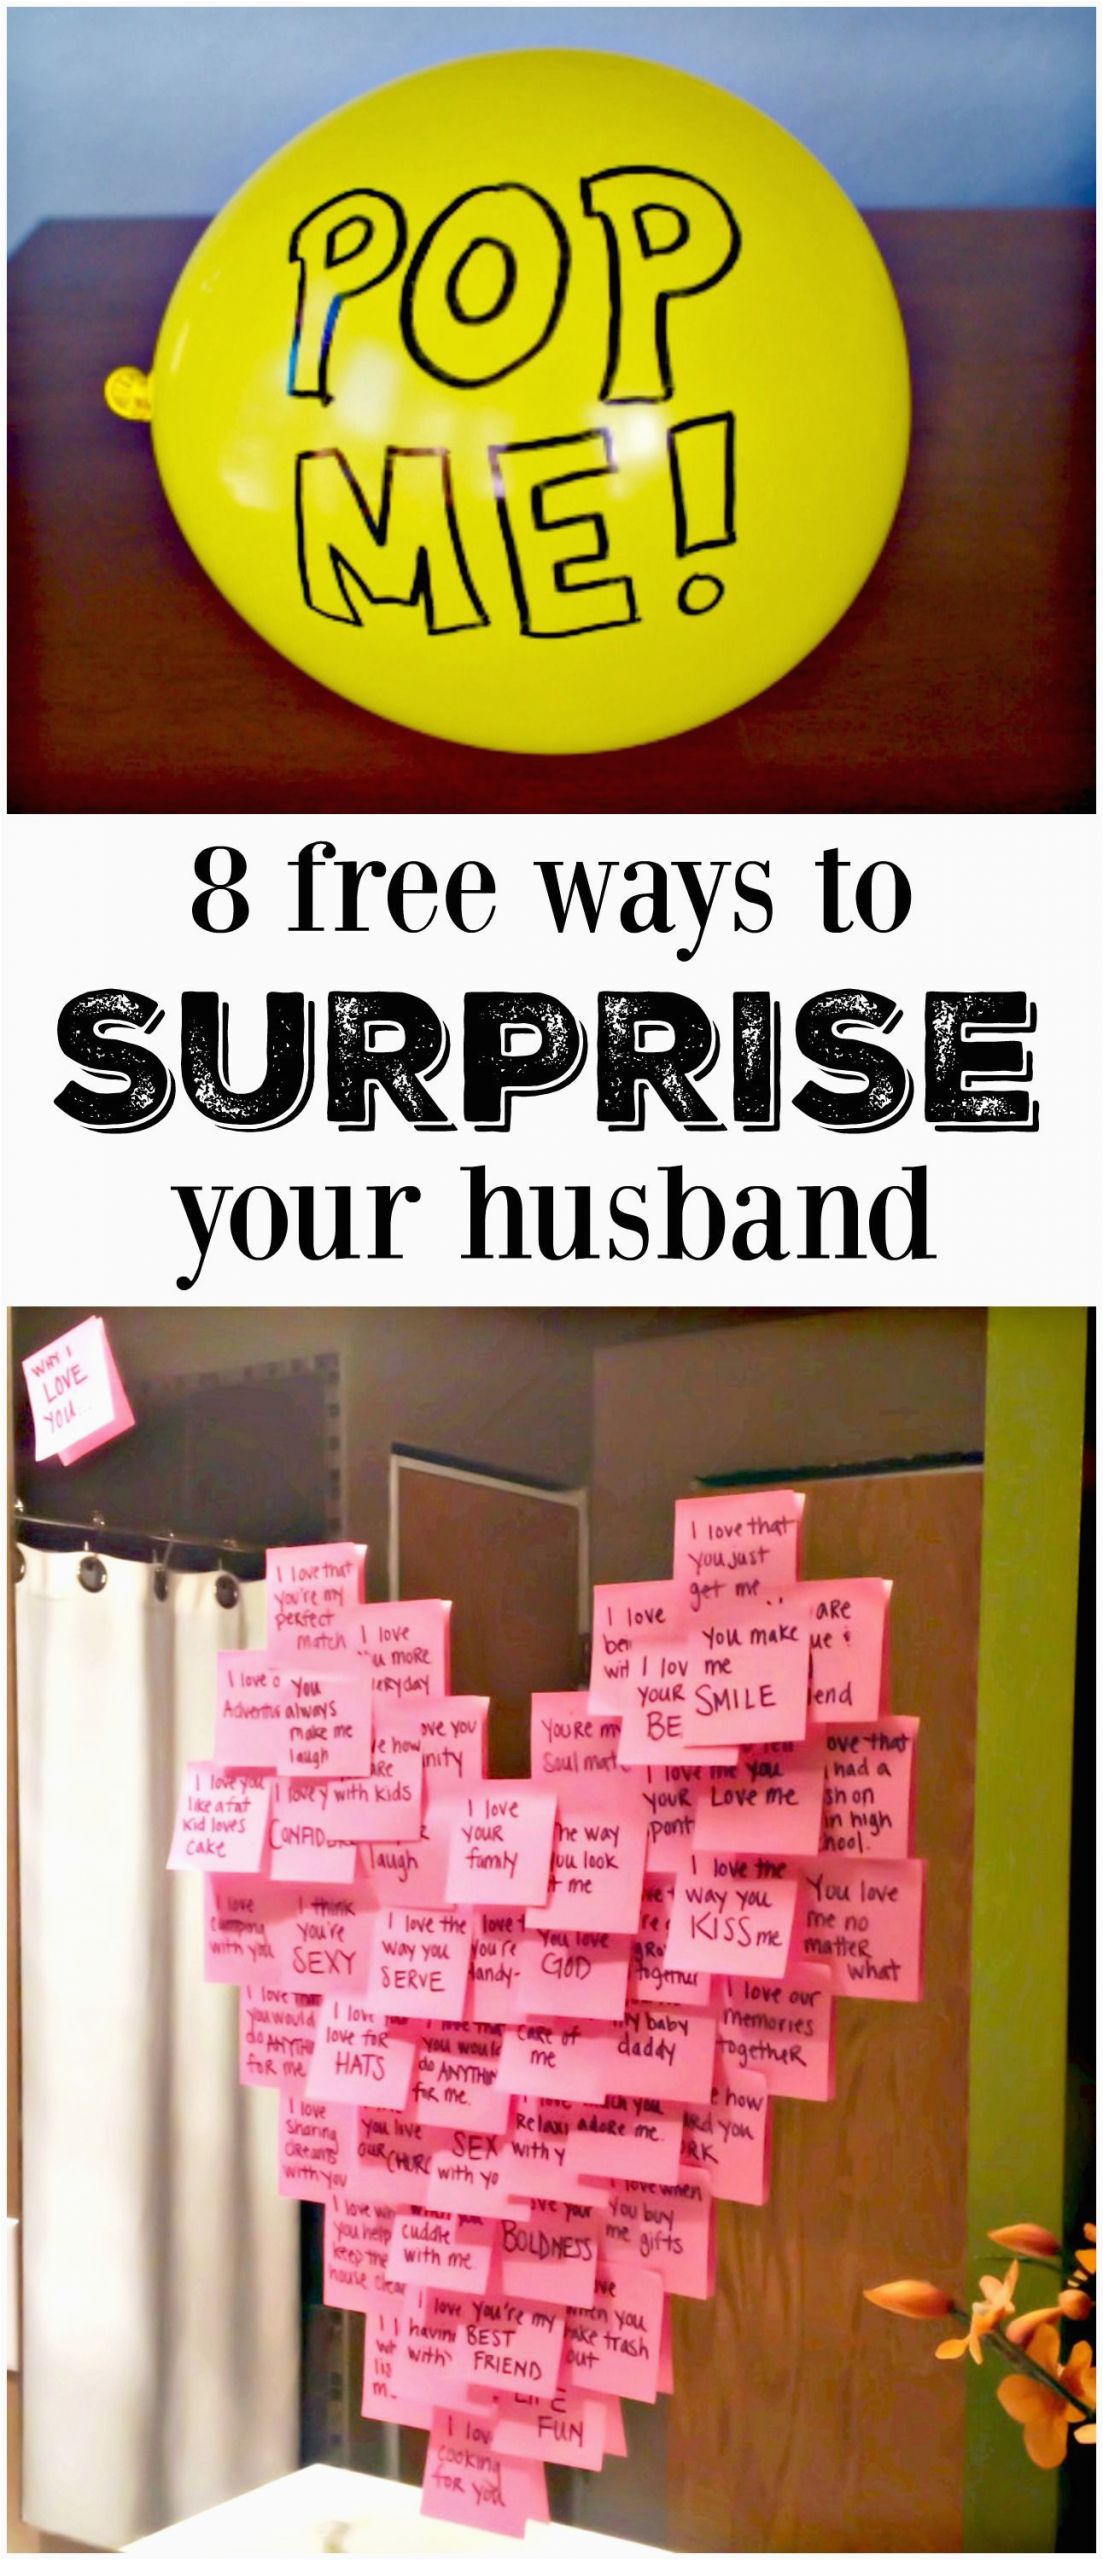 Birthday Gift Ideas for Husband In Dubai 8 Meaningful Ways to Make His Day Diy Ideas Valentines